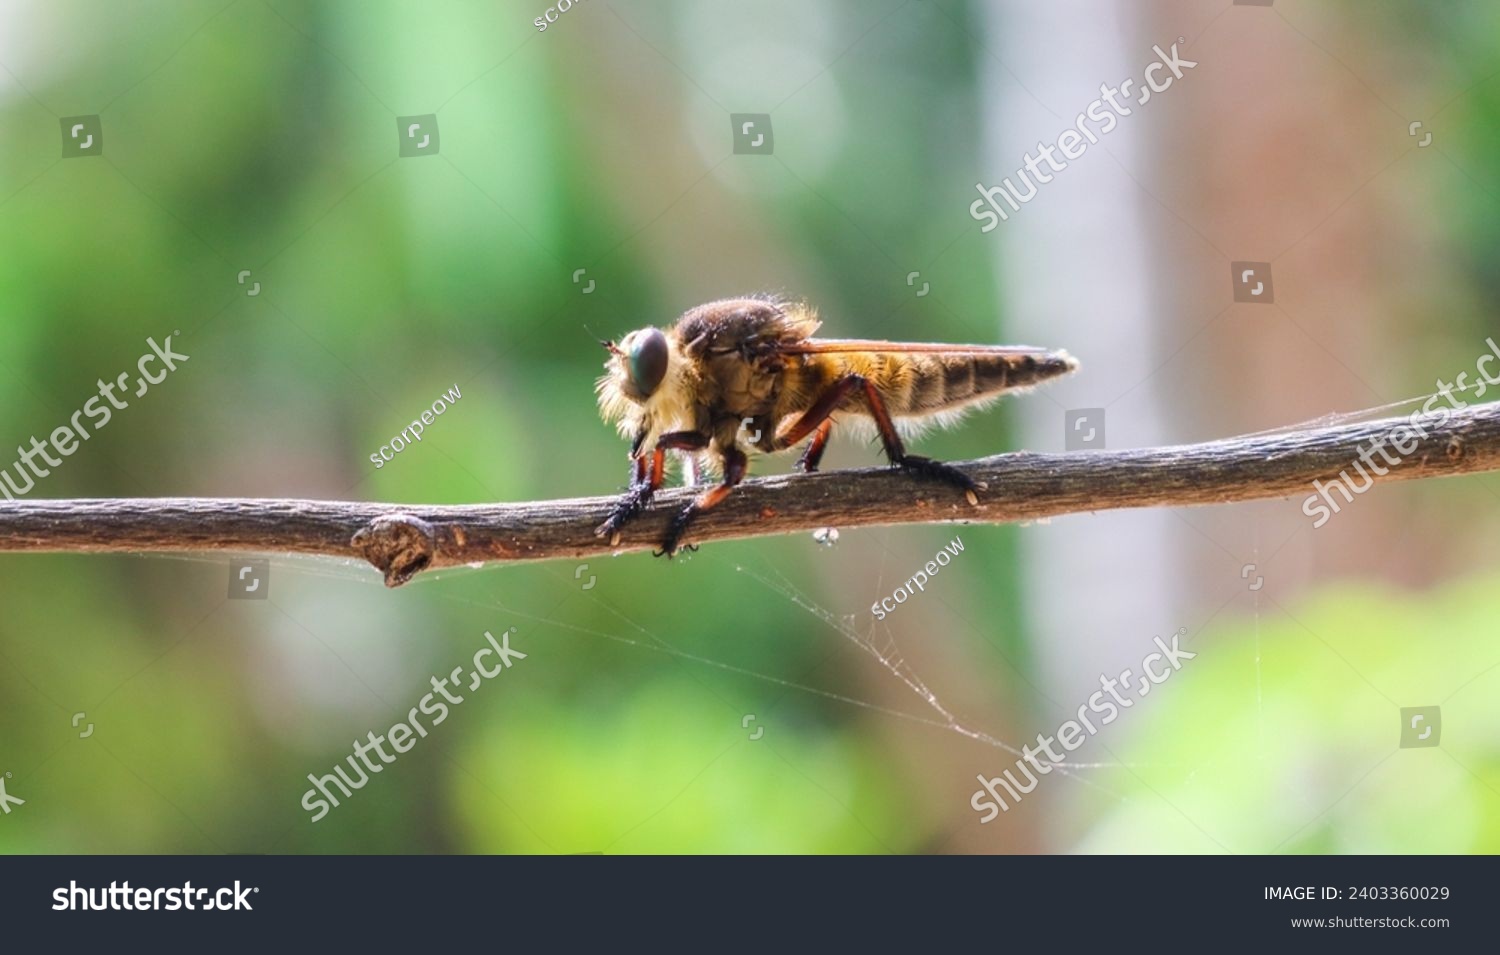 Promachus rufipes or Giant Robber Fly genus of flies also known as the red-footed cannibalfly or bee panther, is a fierce little predator. Close up Robber Fly perched on a tree trunk #2403360029